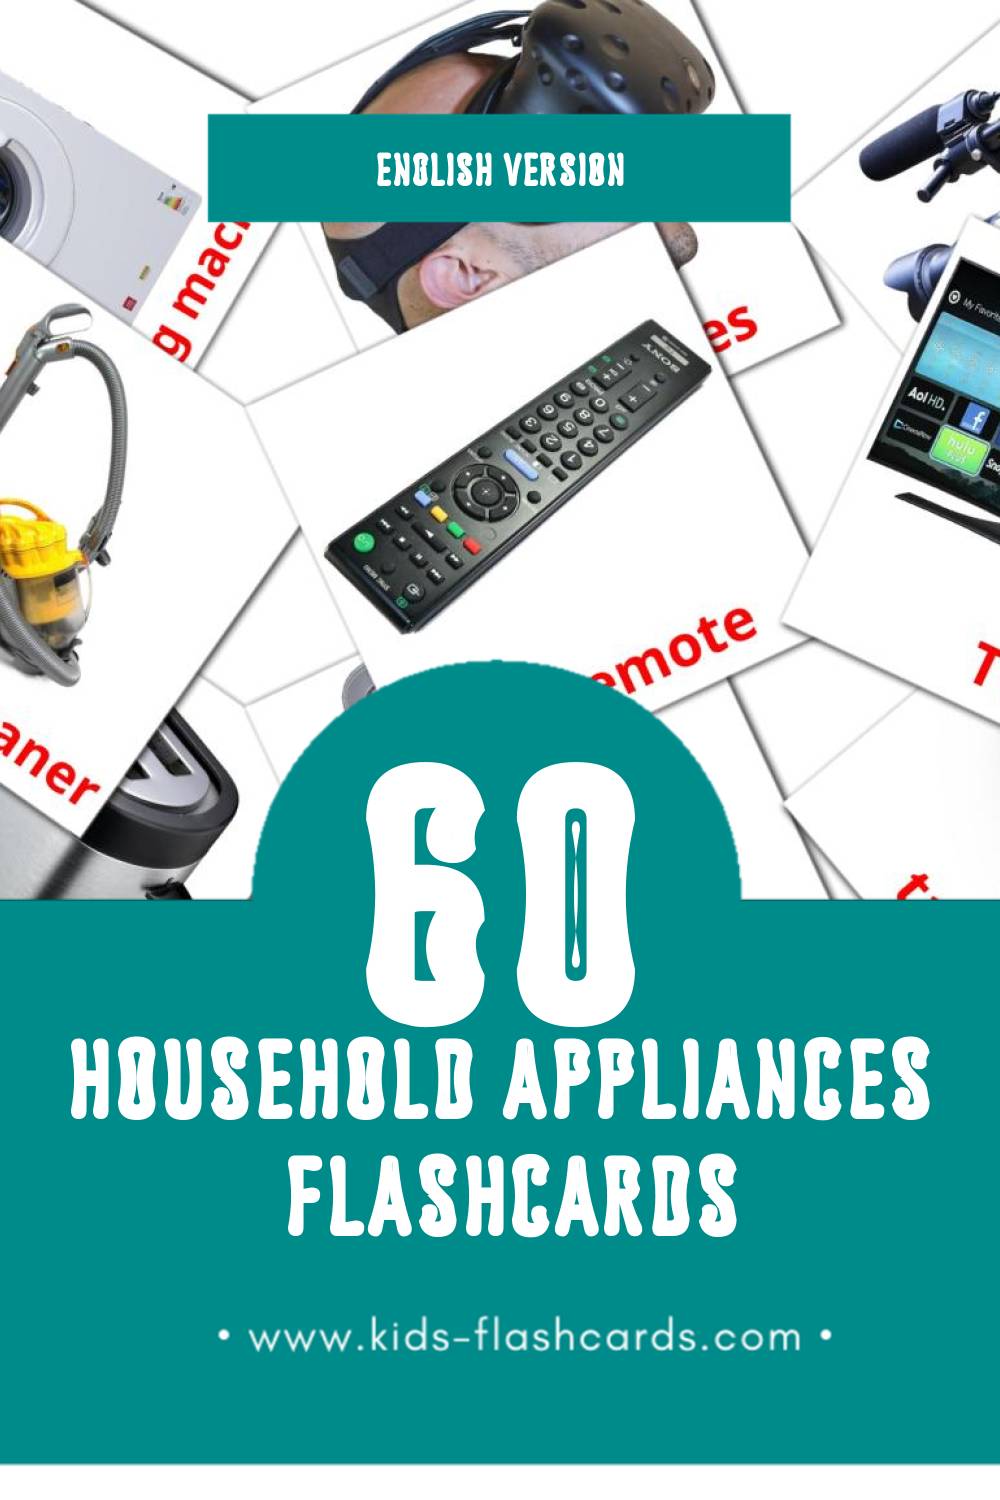 Visual Household Appliances Flashcards for Toddlers (59 cards in English)